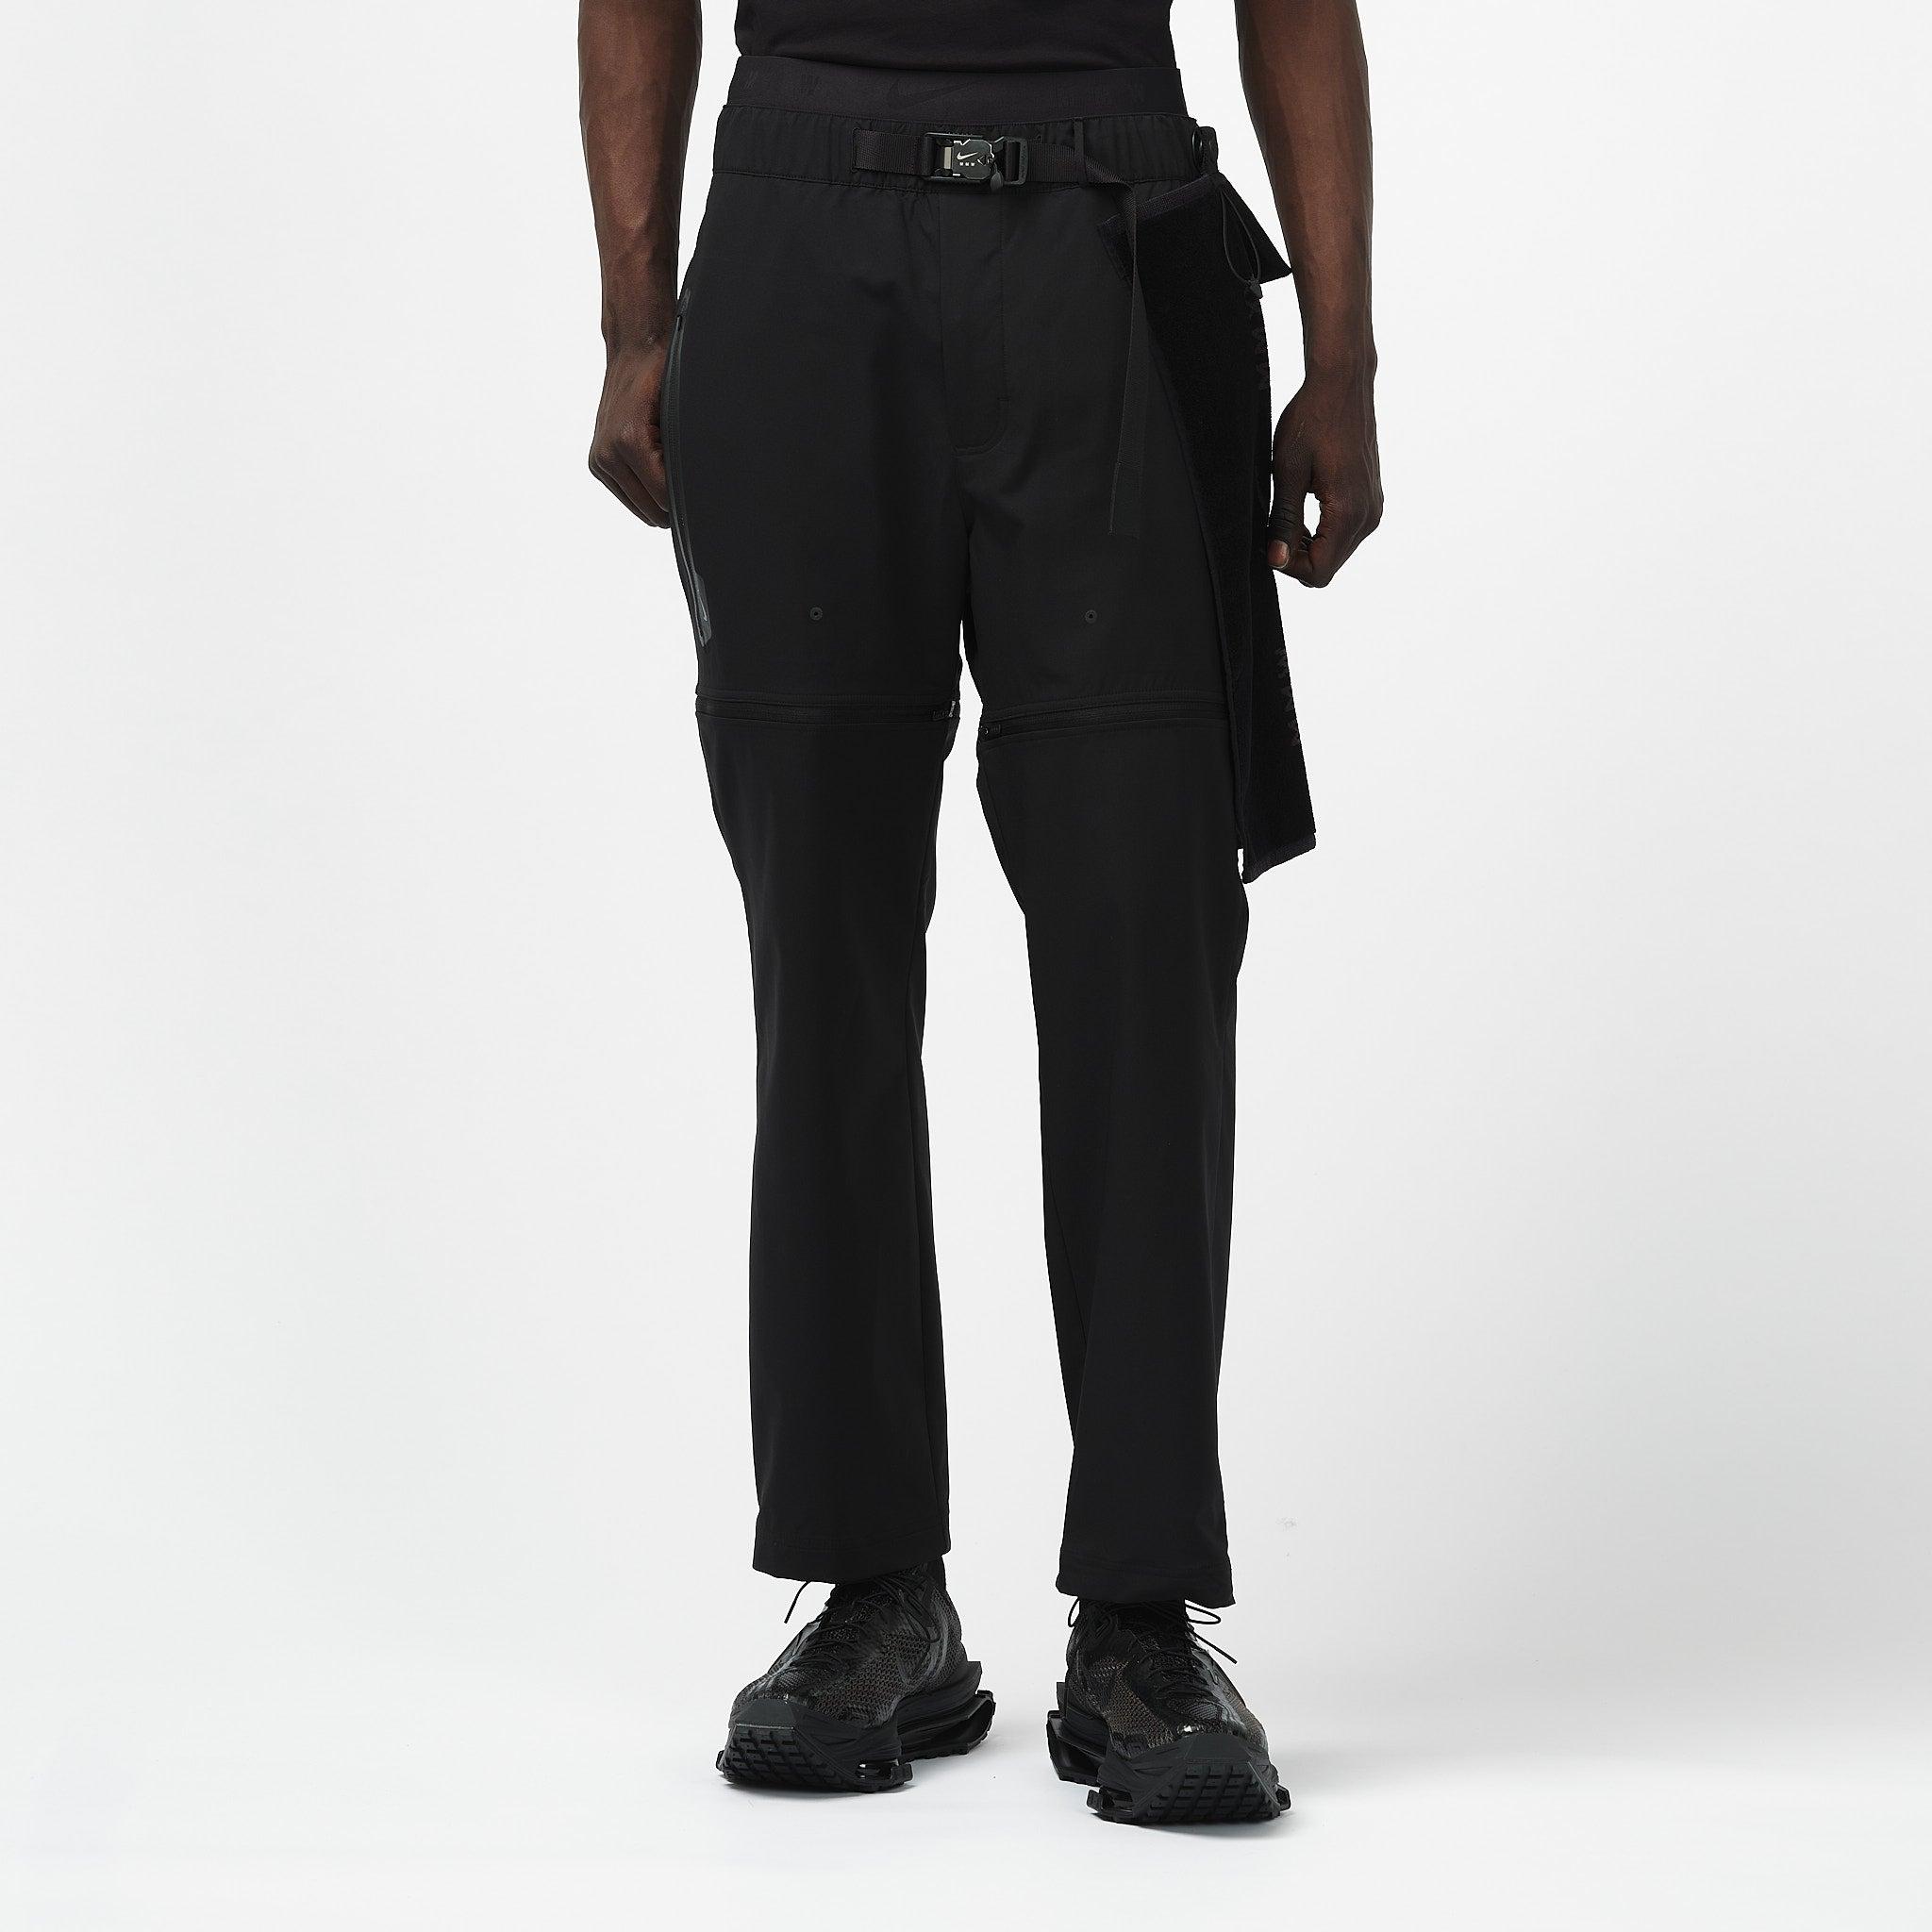 Nike Mmw X 3-in-1 Convertible Pants In Black For Men Lyst | lupon.gov.ph